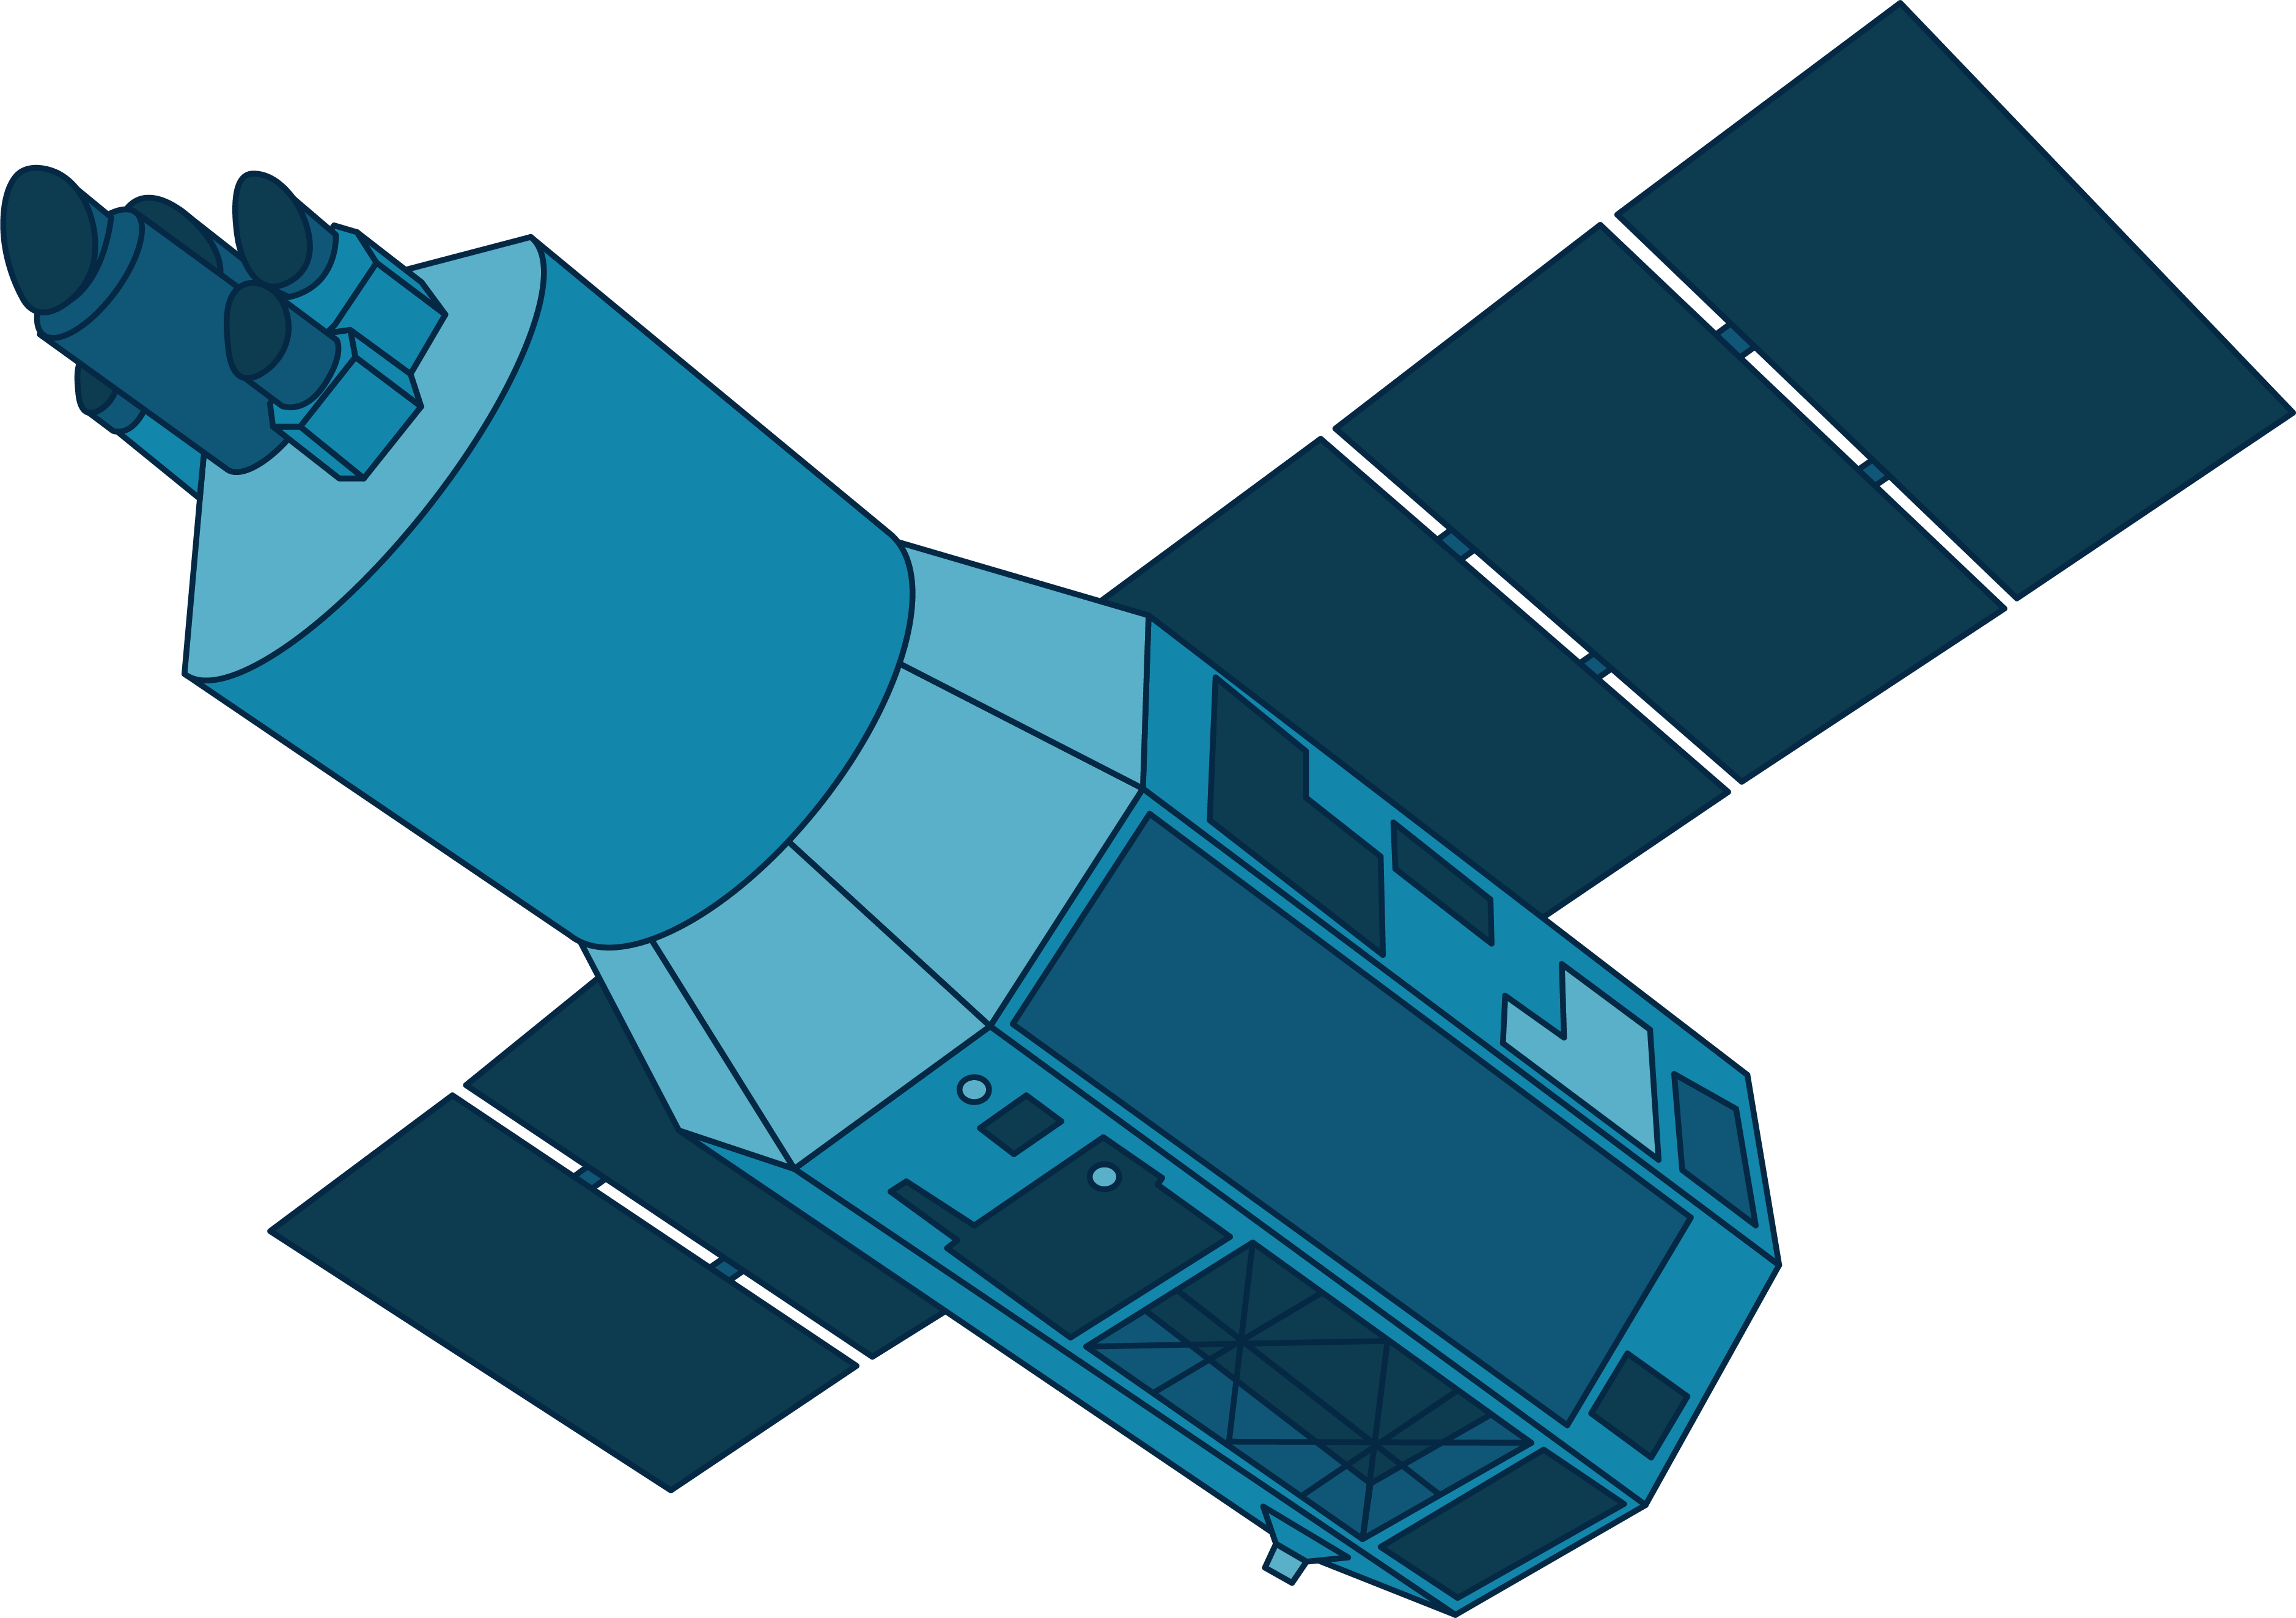 This illustration shows NASA's XRISM spacecraft in shades of blue. A multi-sided cylindrical body has solar array "wings" on either side and a smaller, rounded cylindrical front with small pieces of the instrument at the very front.